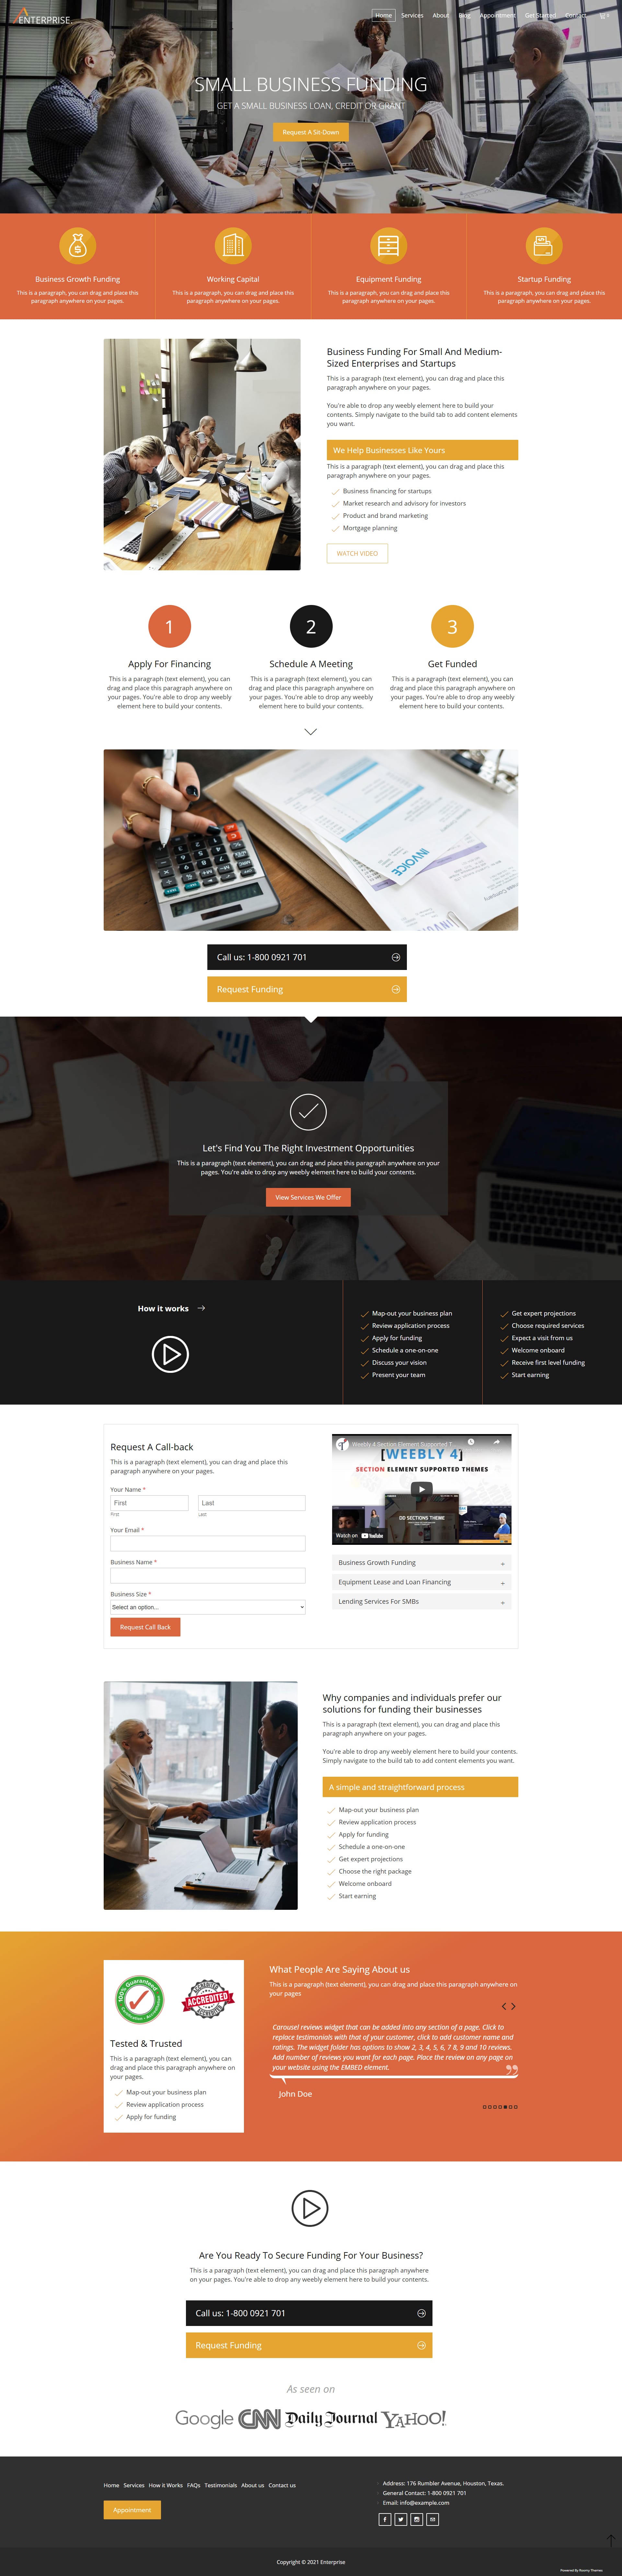 Enterprise website template for business and small firm website design